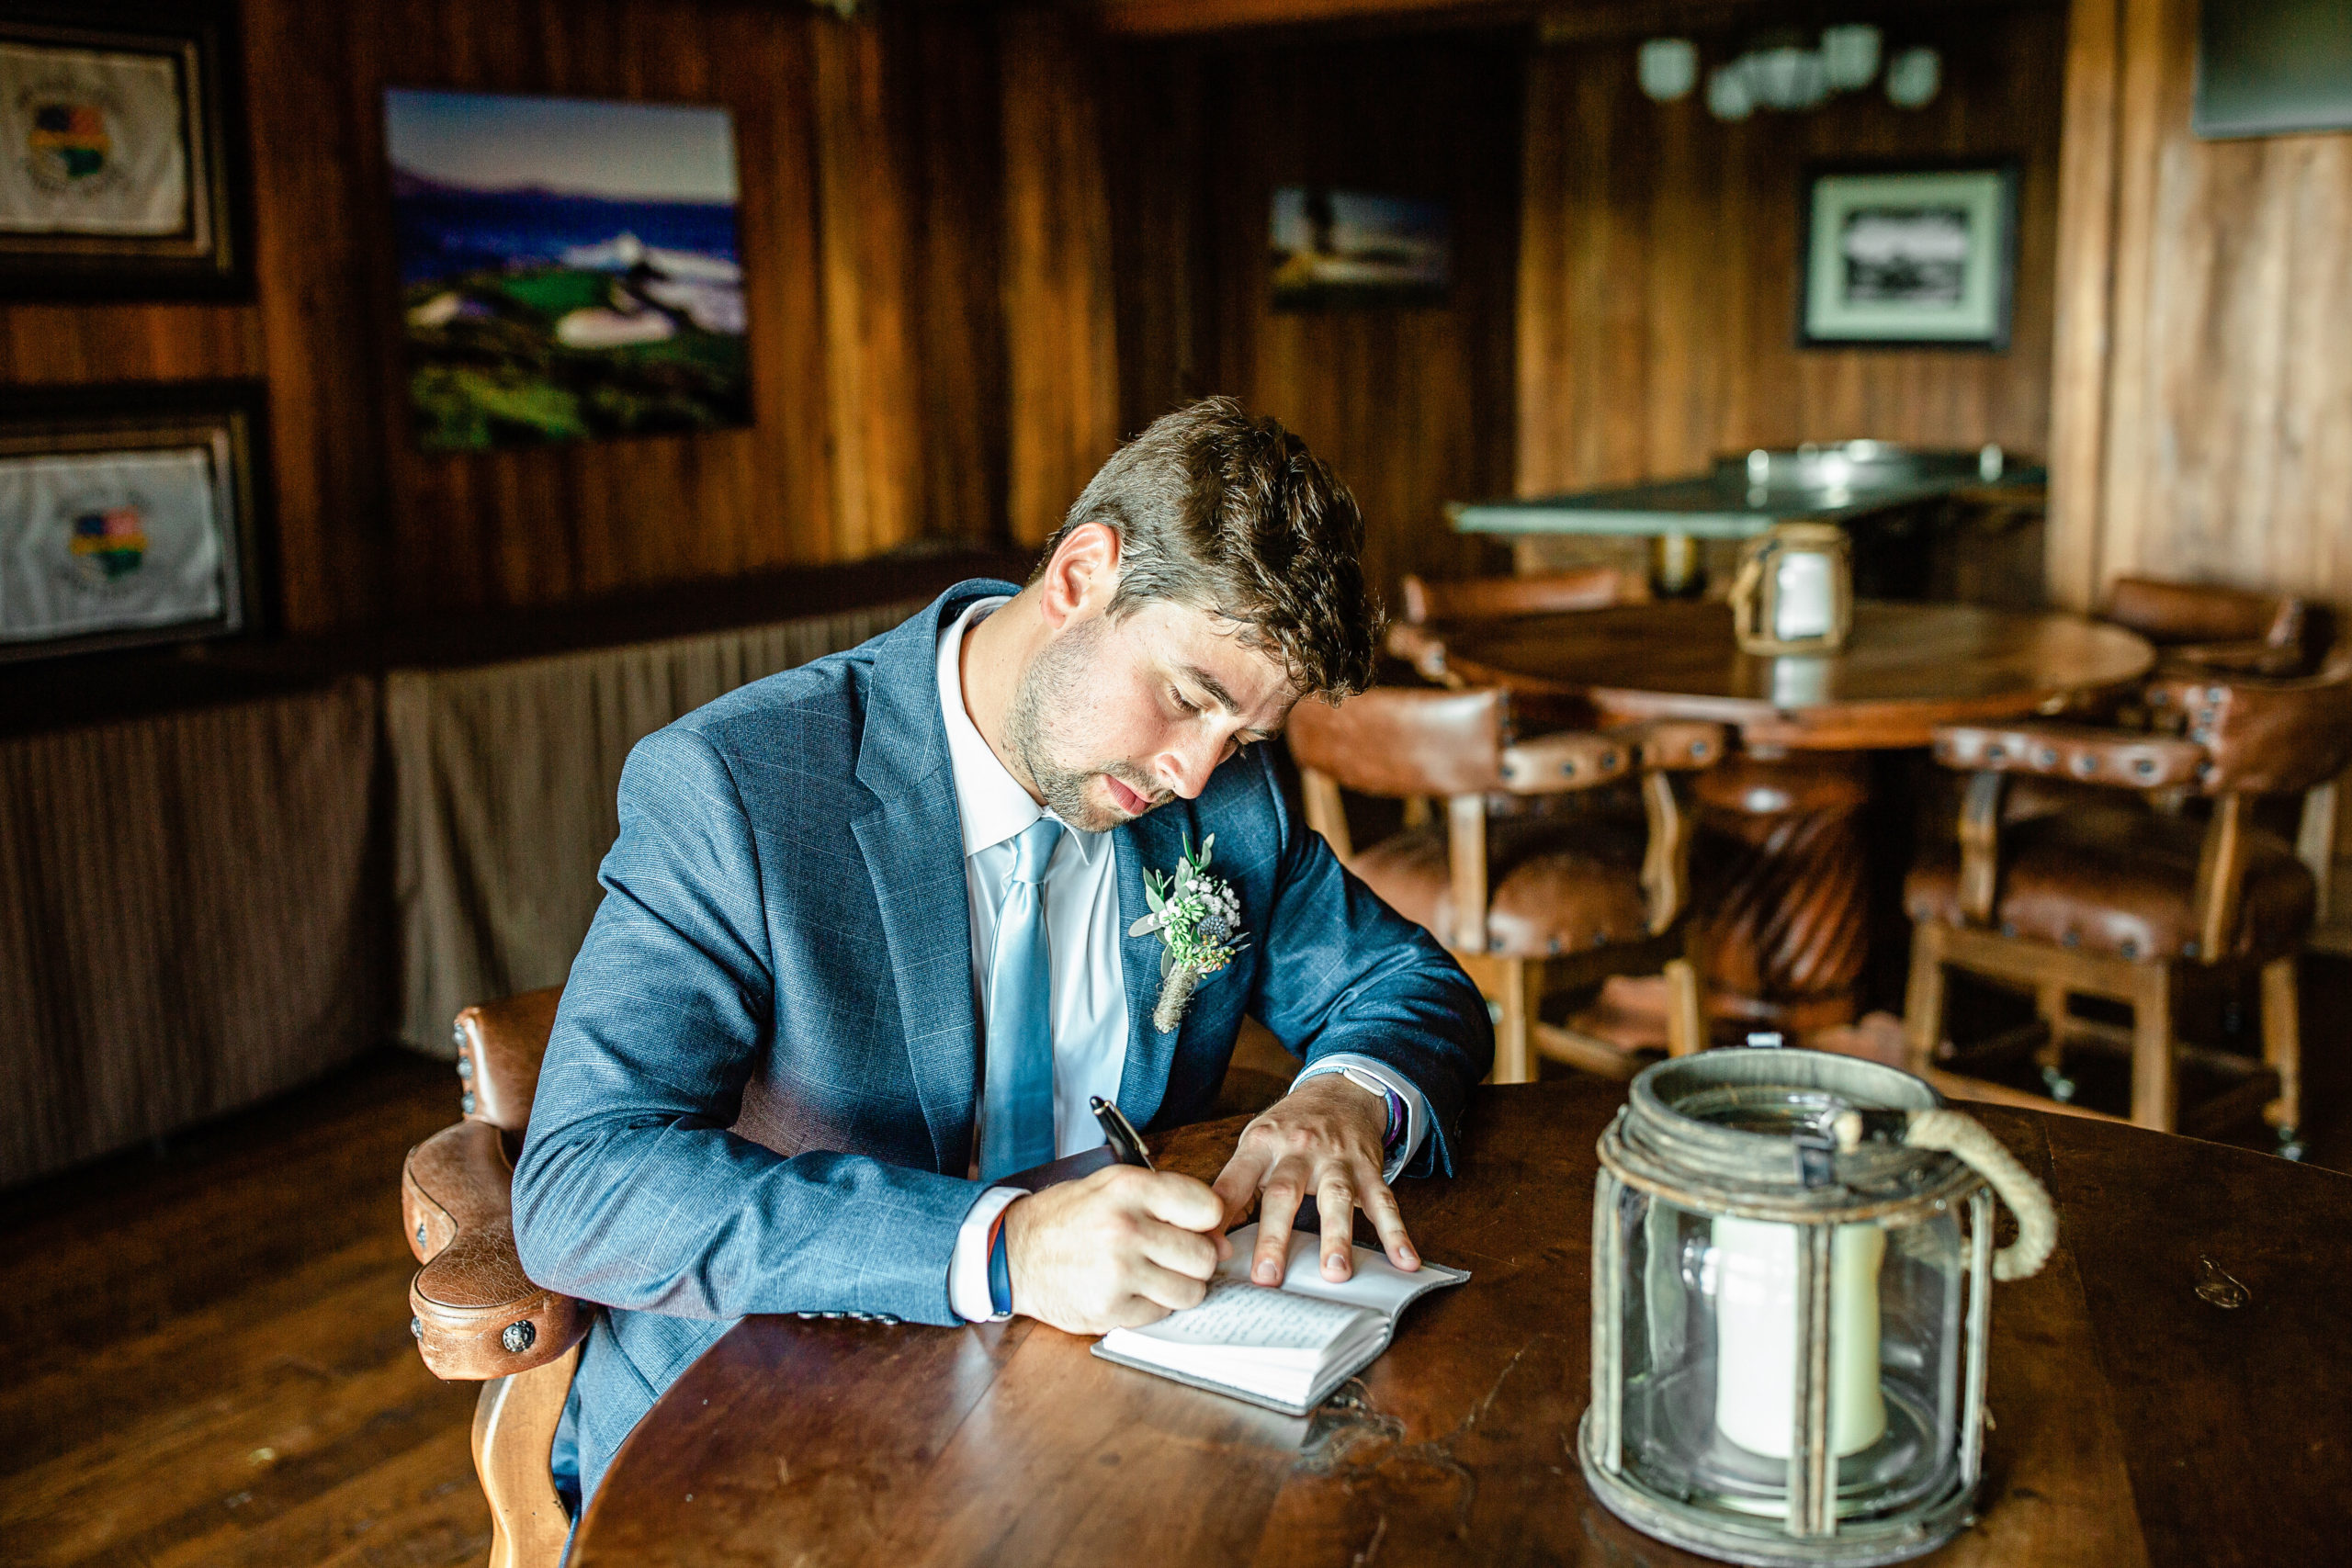 Groom writing his vow to his bride